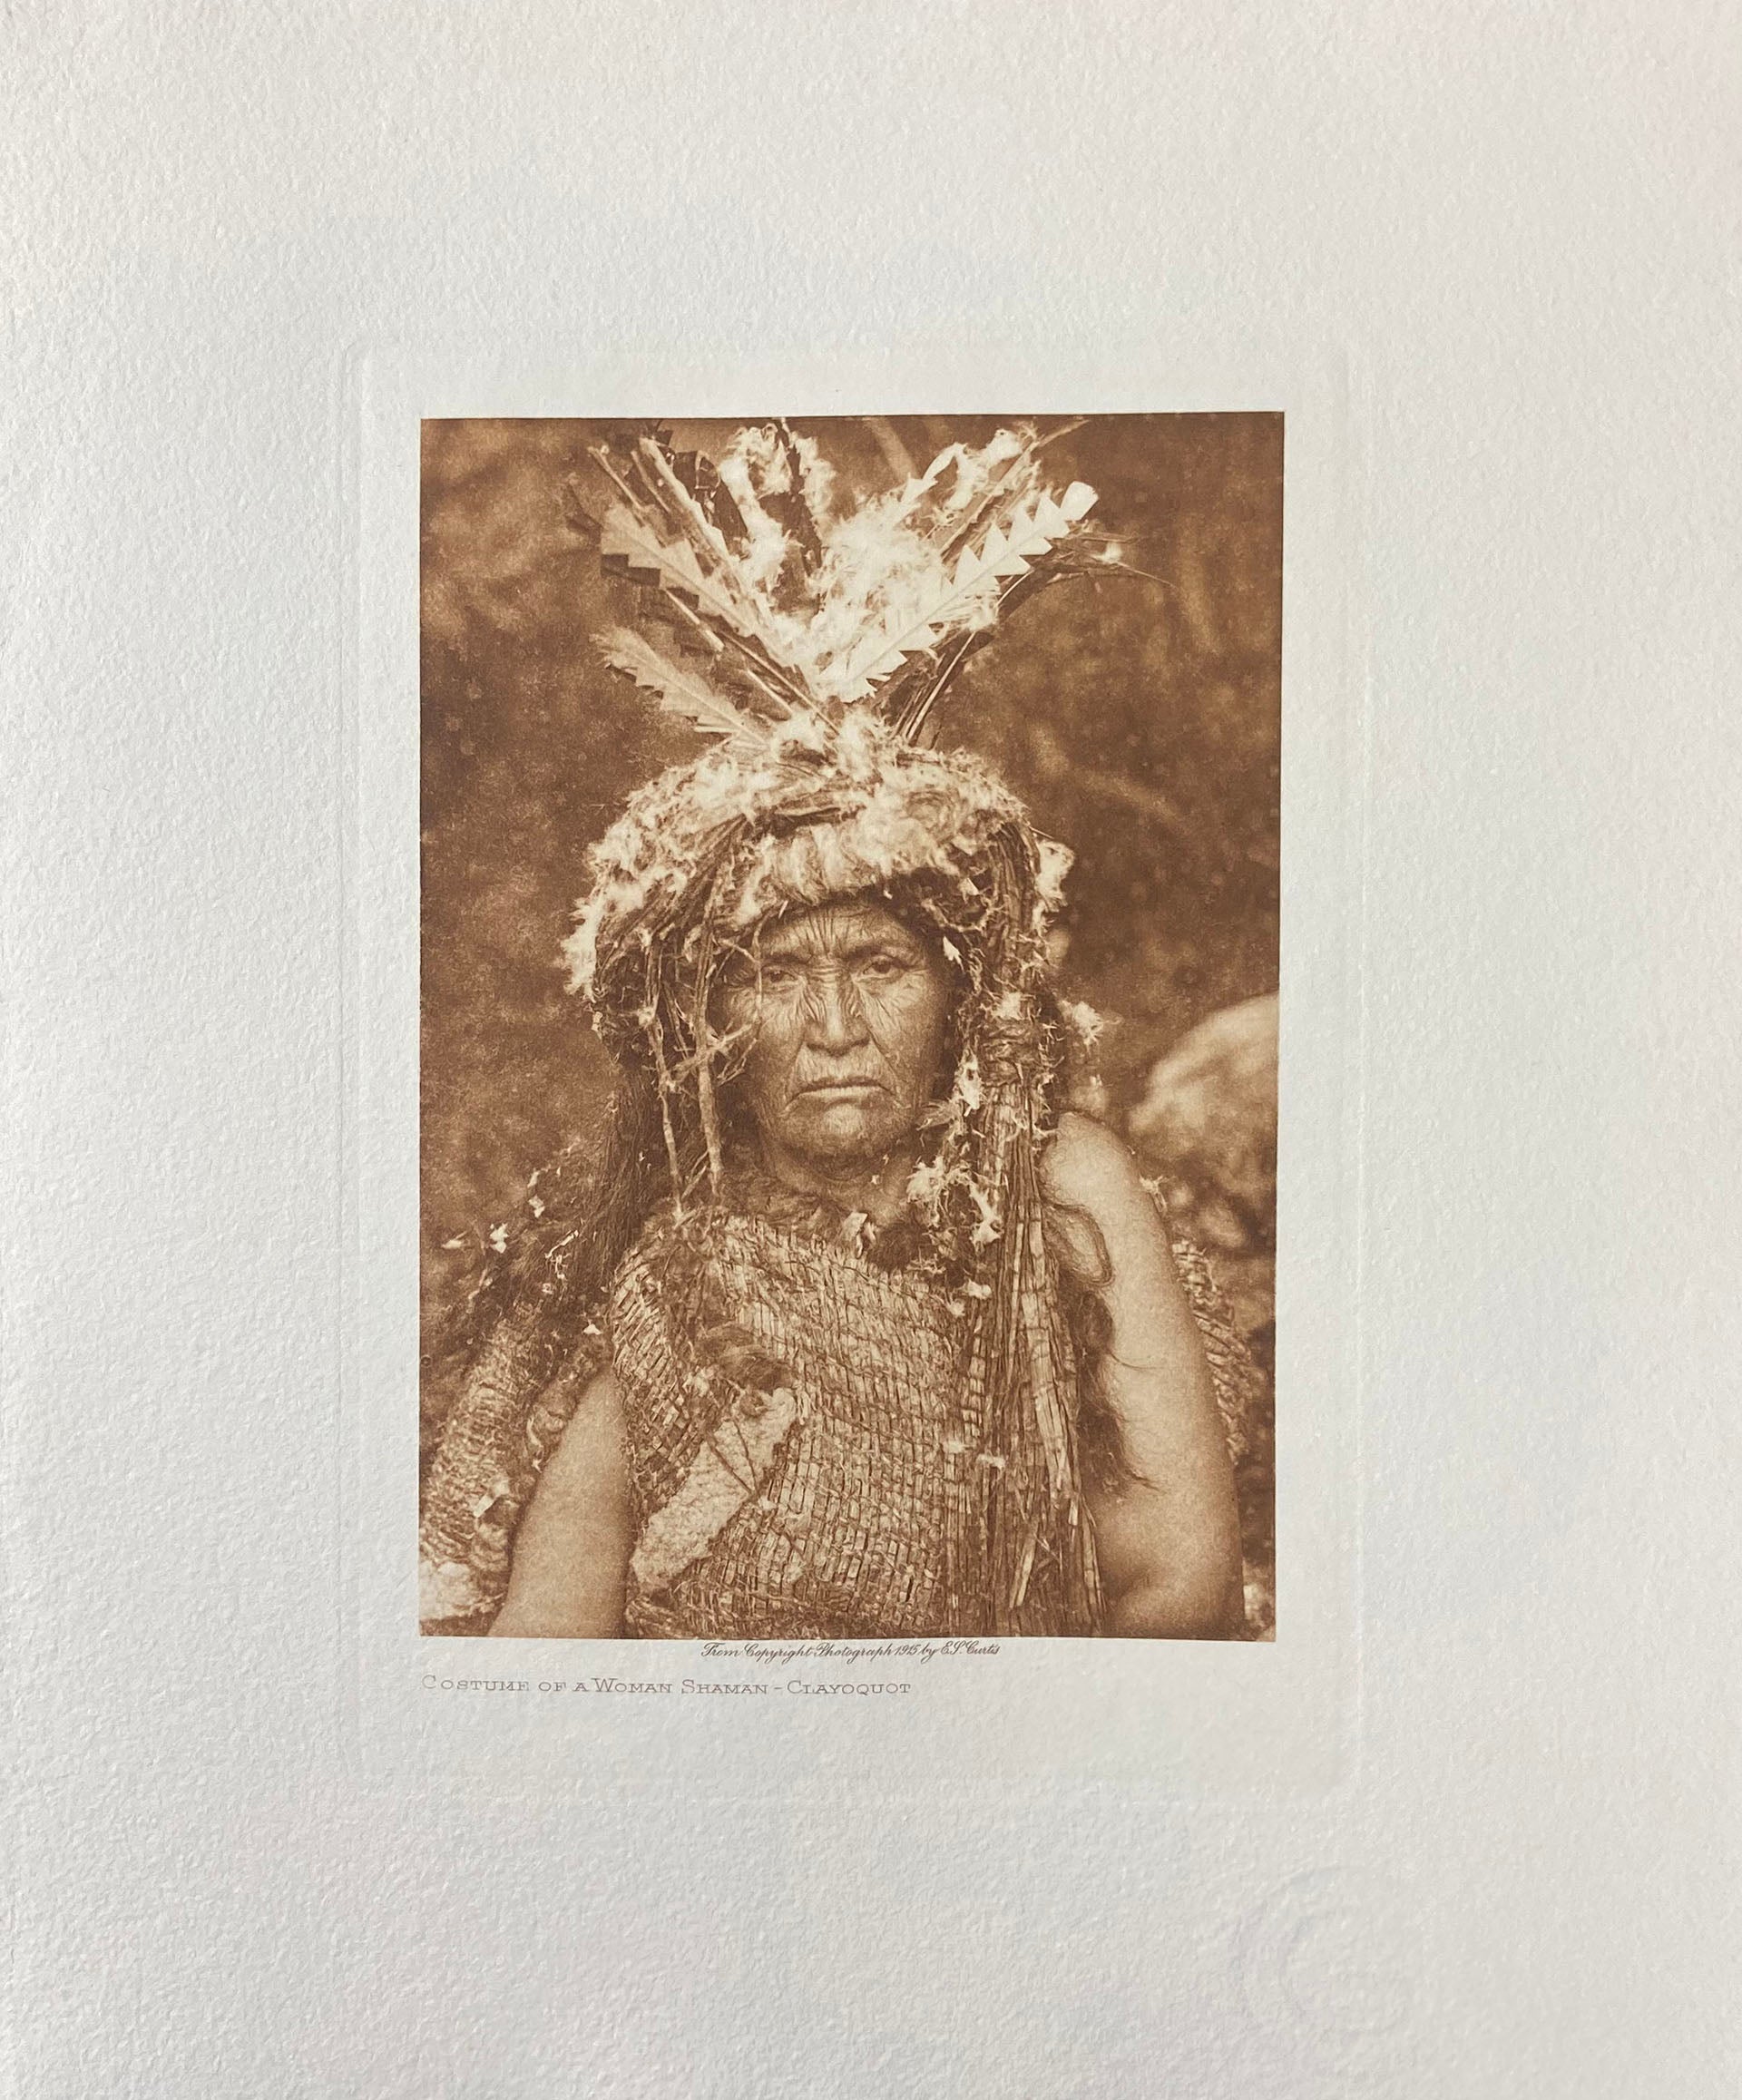 Costume of a Woman Shaman - Clayoquot